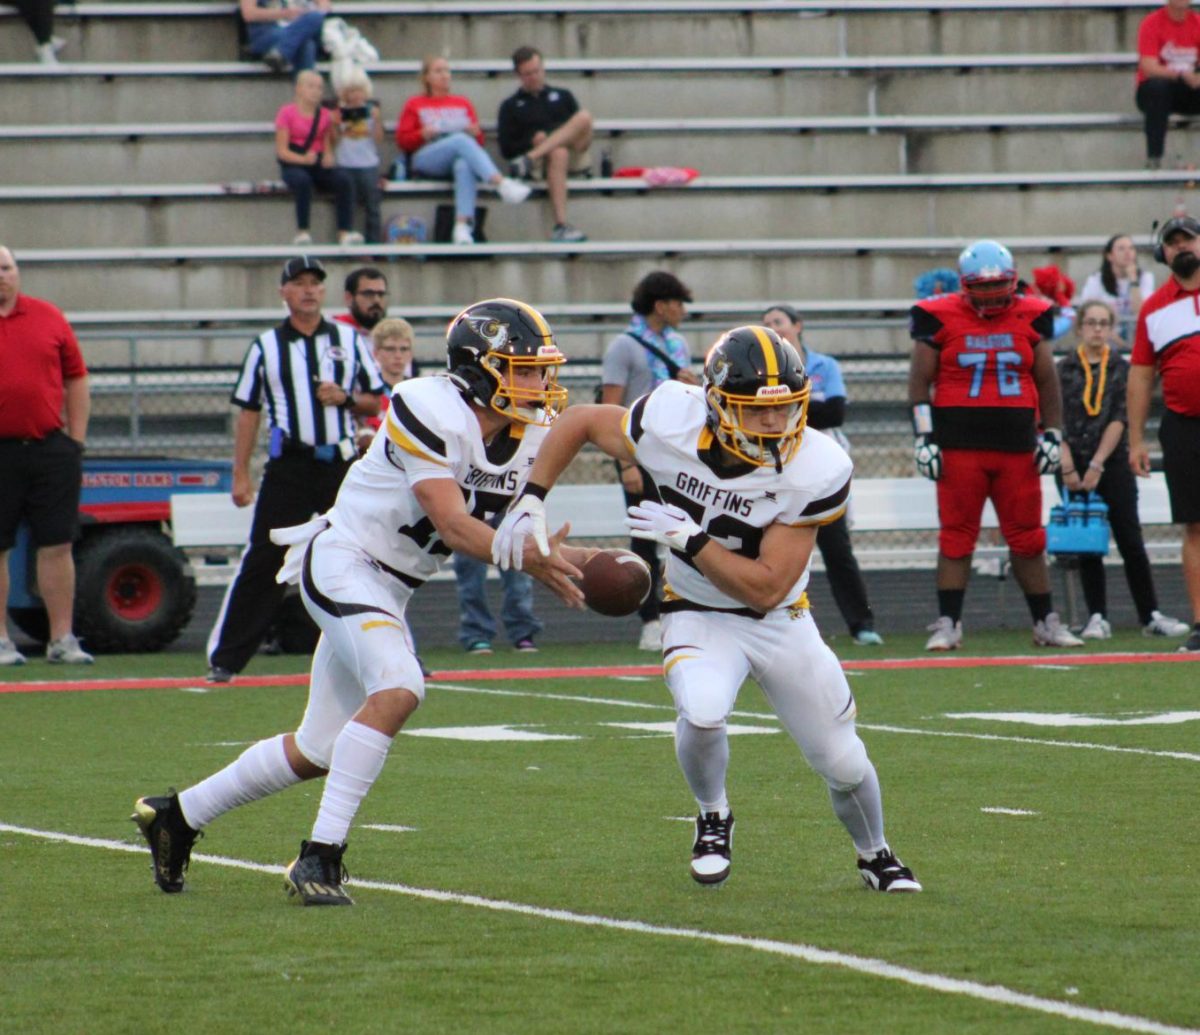 On the 25 yard line, Chase Grow (9) hands the ball off to Mason Gunn (11) in the 2nd quarter on 1st down.